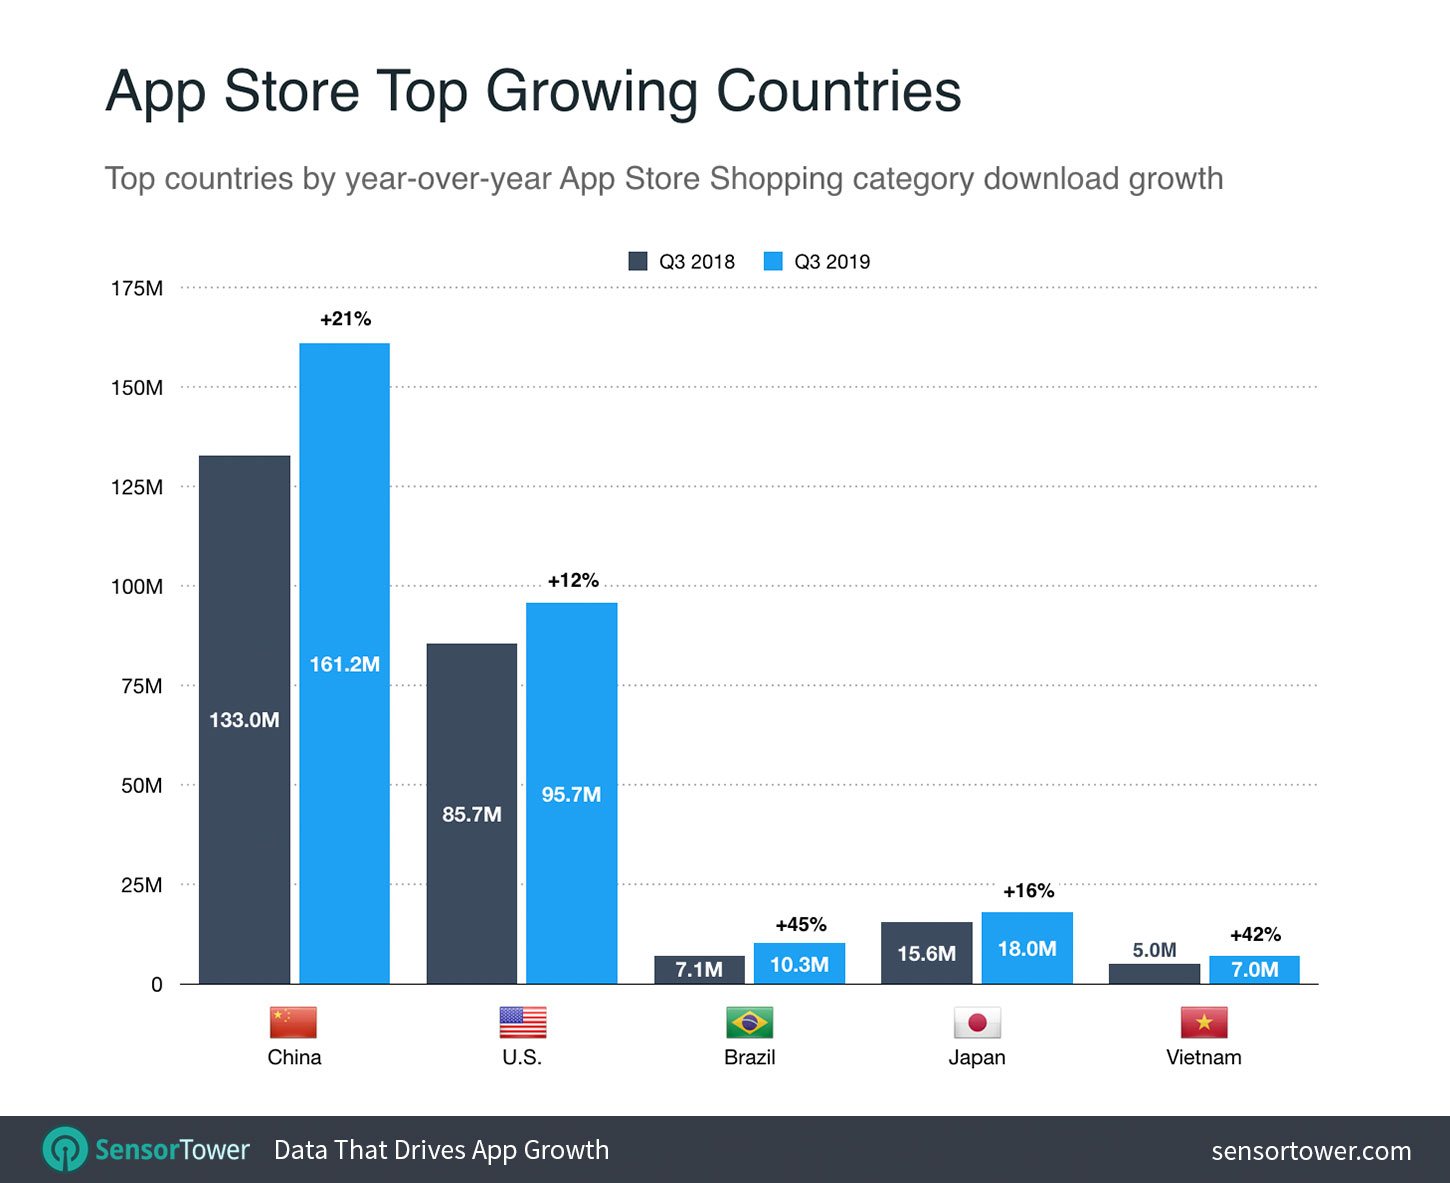 App Store Shopping Apps Top Growing Countries Chart